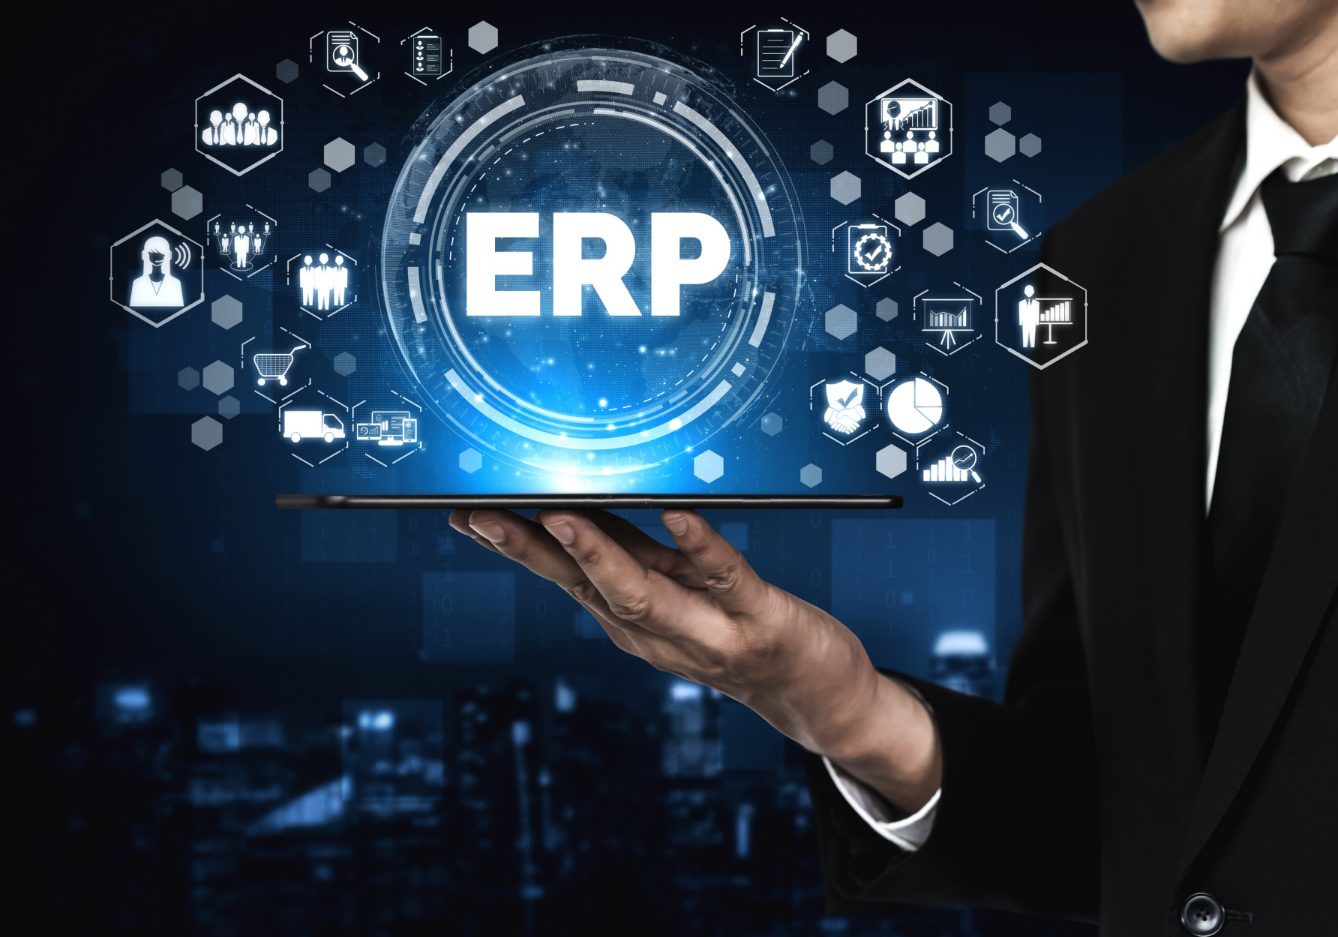 Representation of an enterprise resource management (ERP) software system, facilitating efficient planning and management of business resources